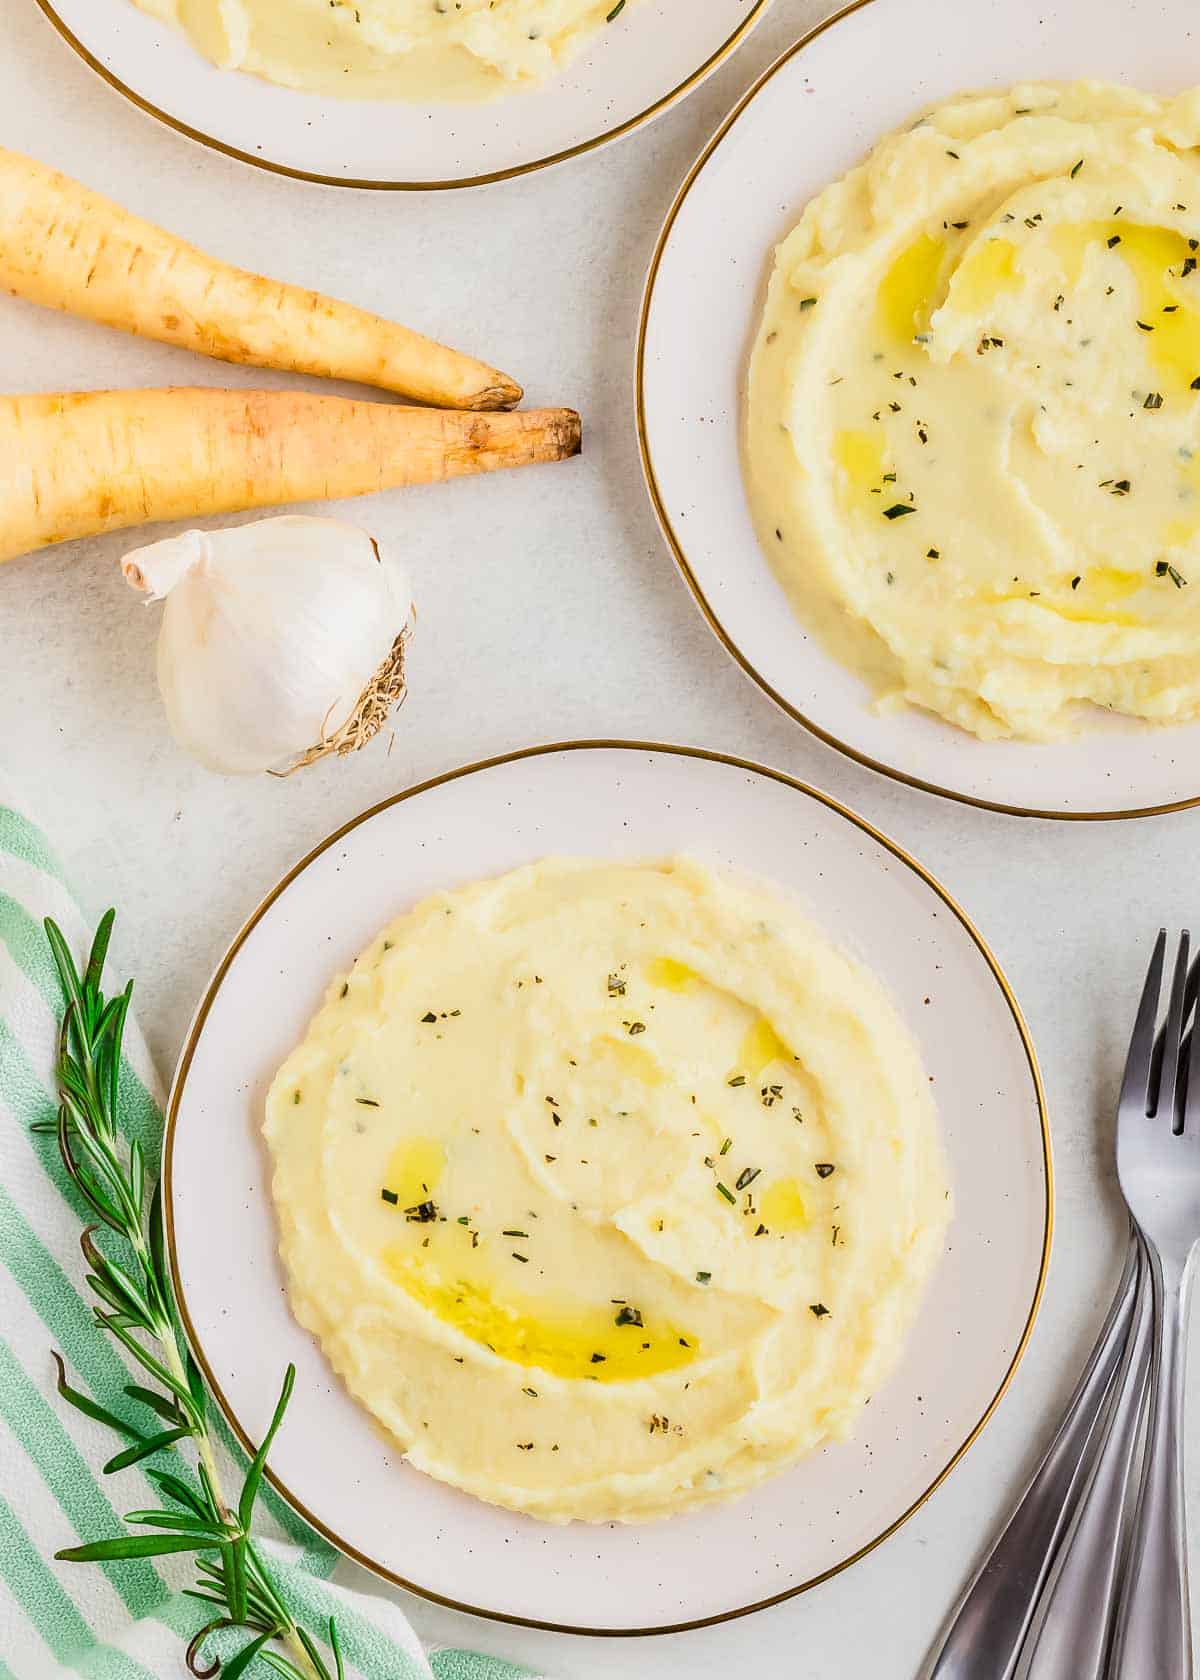 A plate of creamy parsnip puree garnished with herbs, accompanied by whole parsnips, garlic, and rosemary, arranged on a light surface.